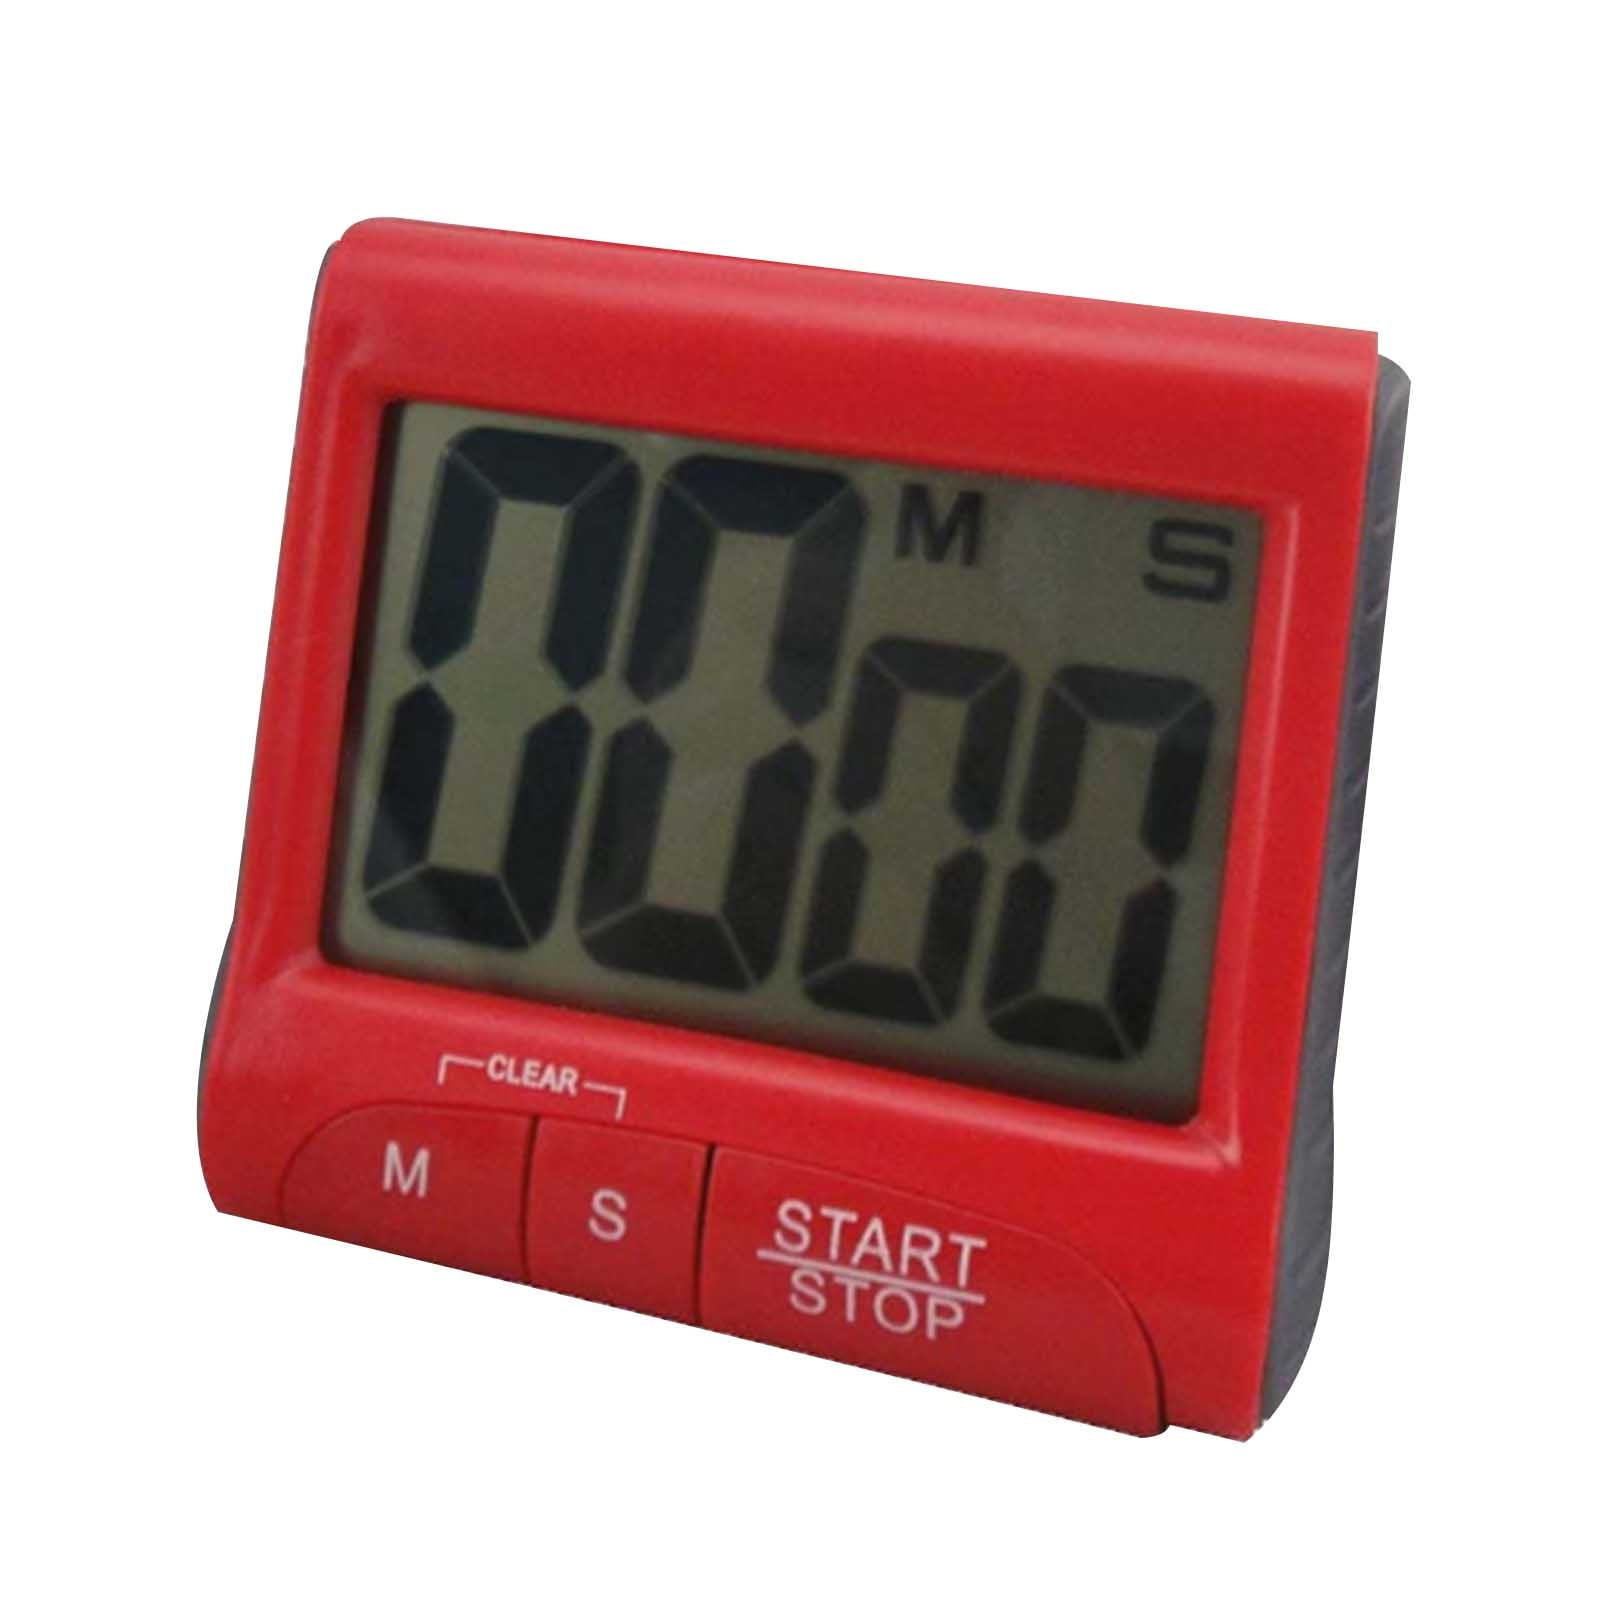 Large Display Digital Timer LED Magnetic Kitchen Cooking Countdown Timer  Study Stopwatch - Black Wholesale